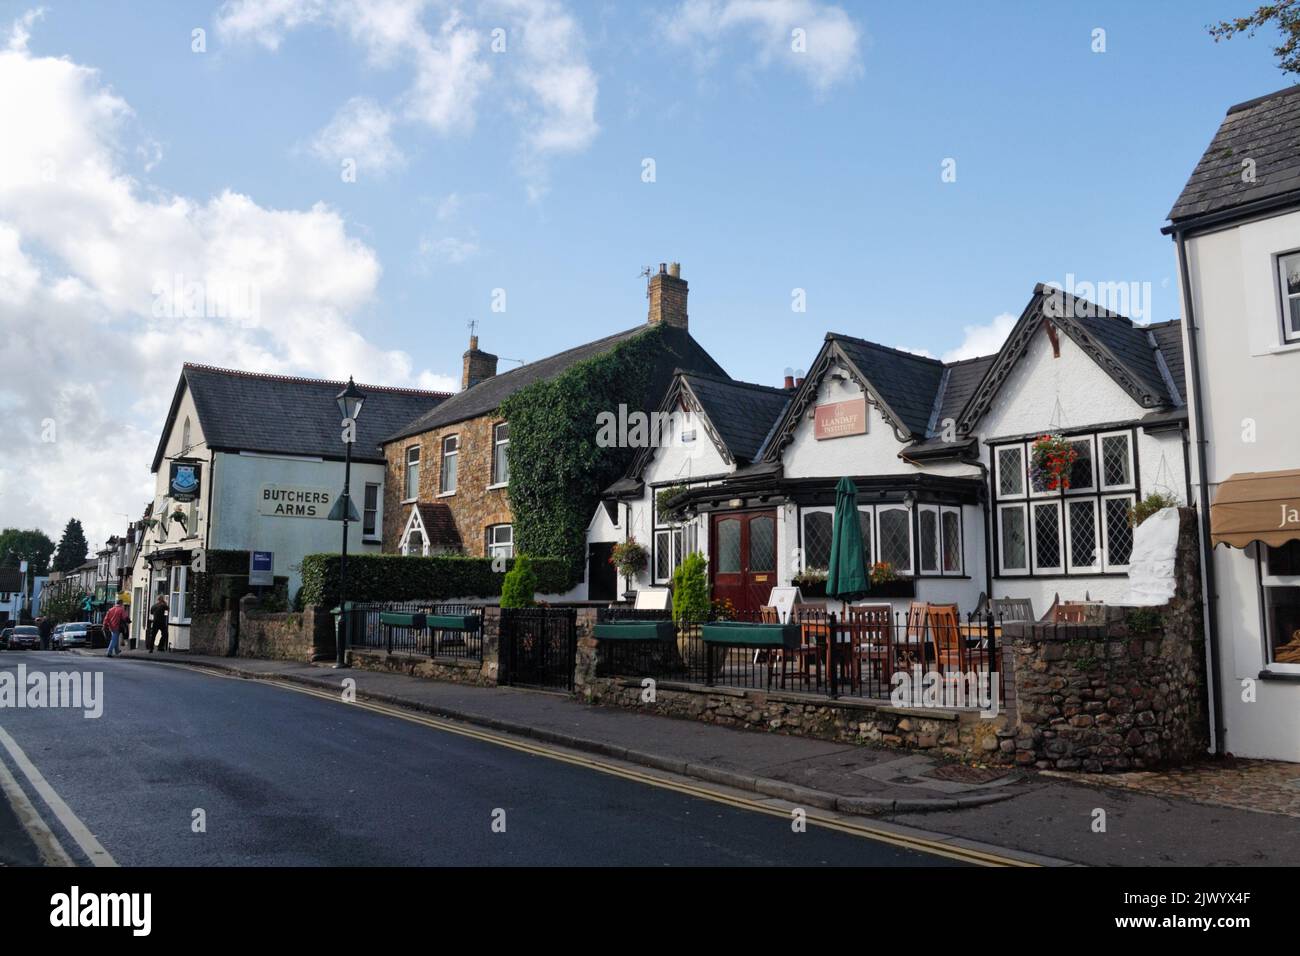 The Institute Social club in Llandaff, Cardiff Wales UK. Street view Stock Photo